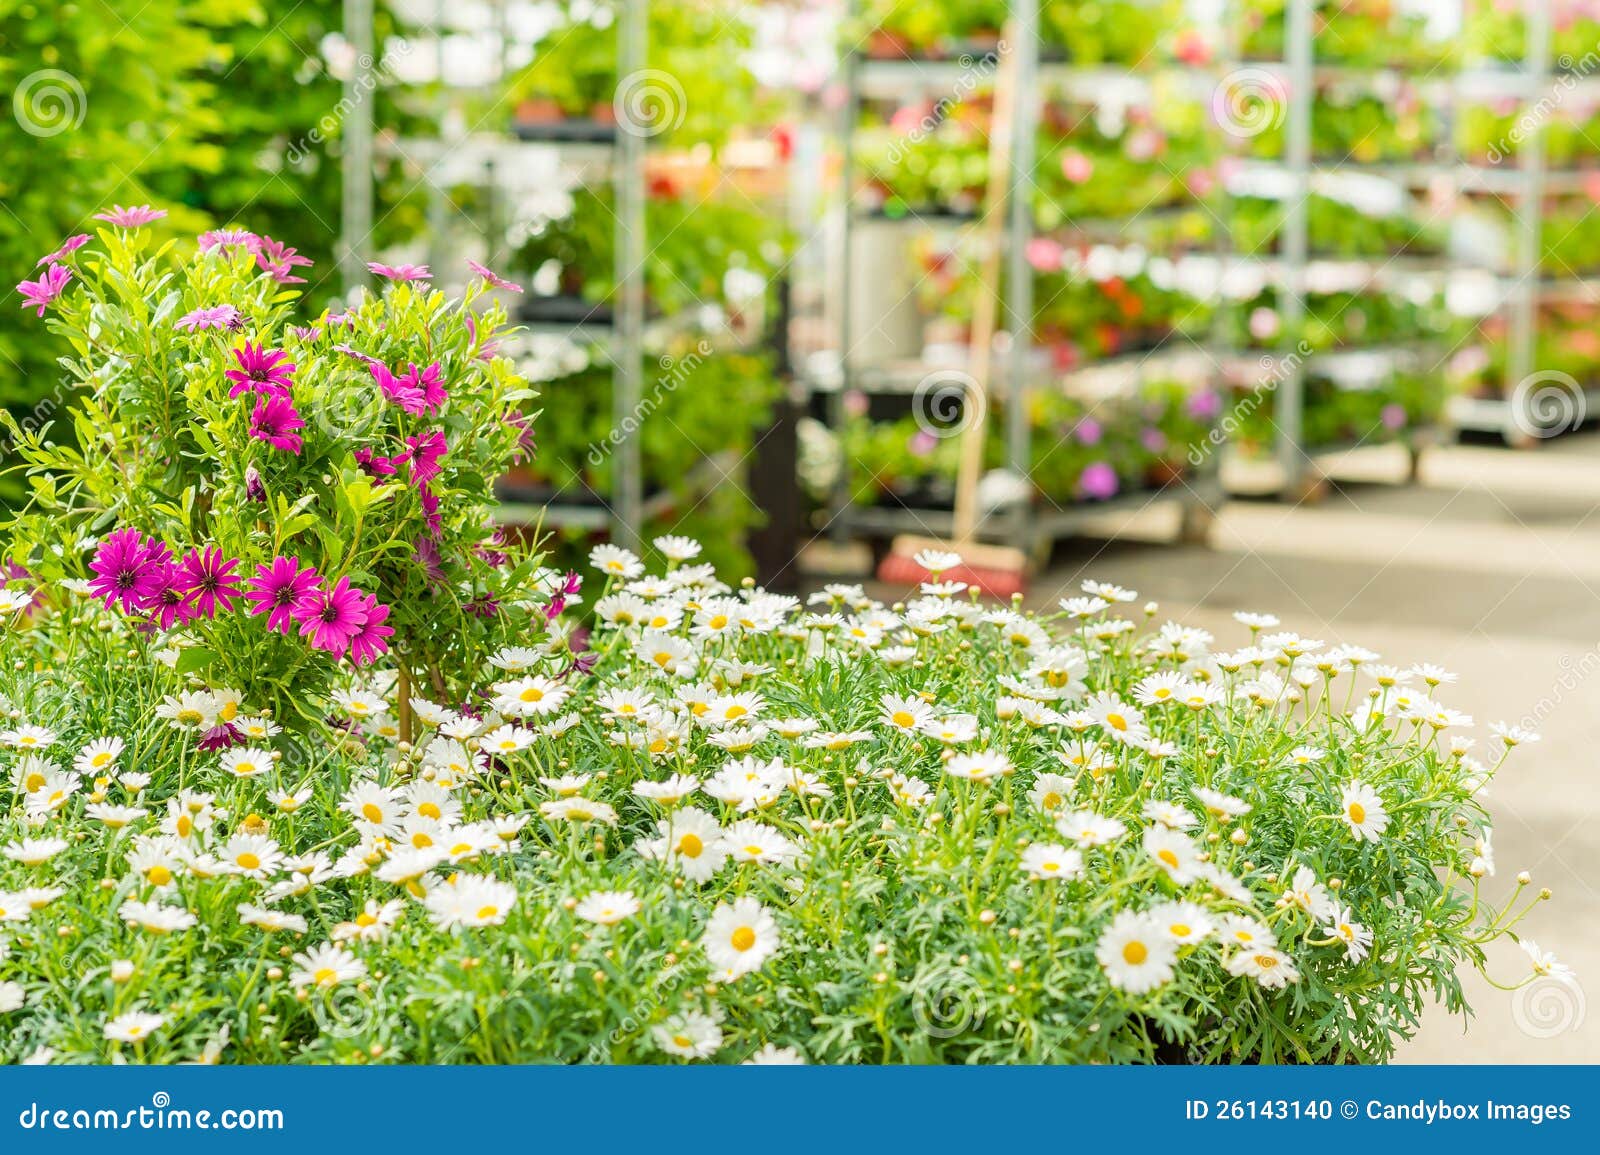 green house flower shop at garden centre stock photo - image of